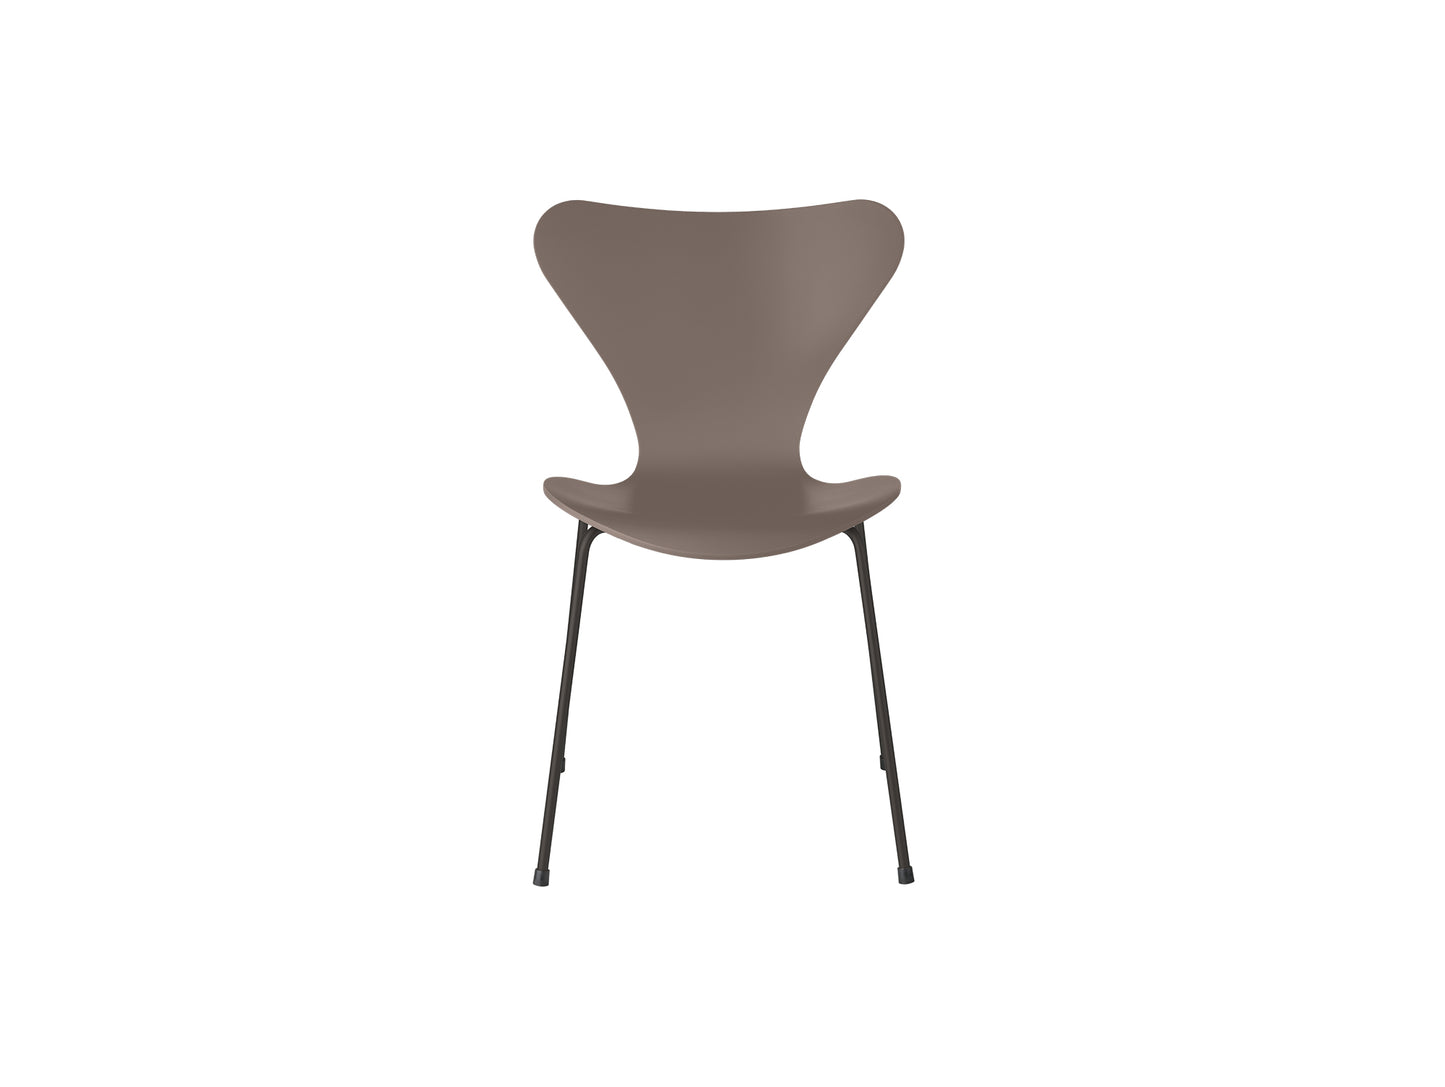 Series 7™ 3107 Dining Chair by Fritz Hansen - Deep Clay Lacquered Veneer Shell / Warm Graphite Steel